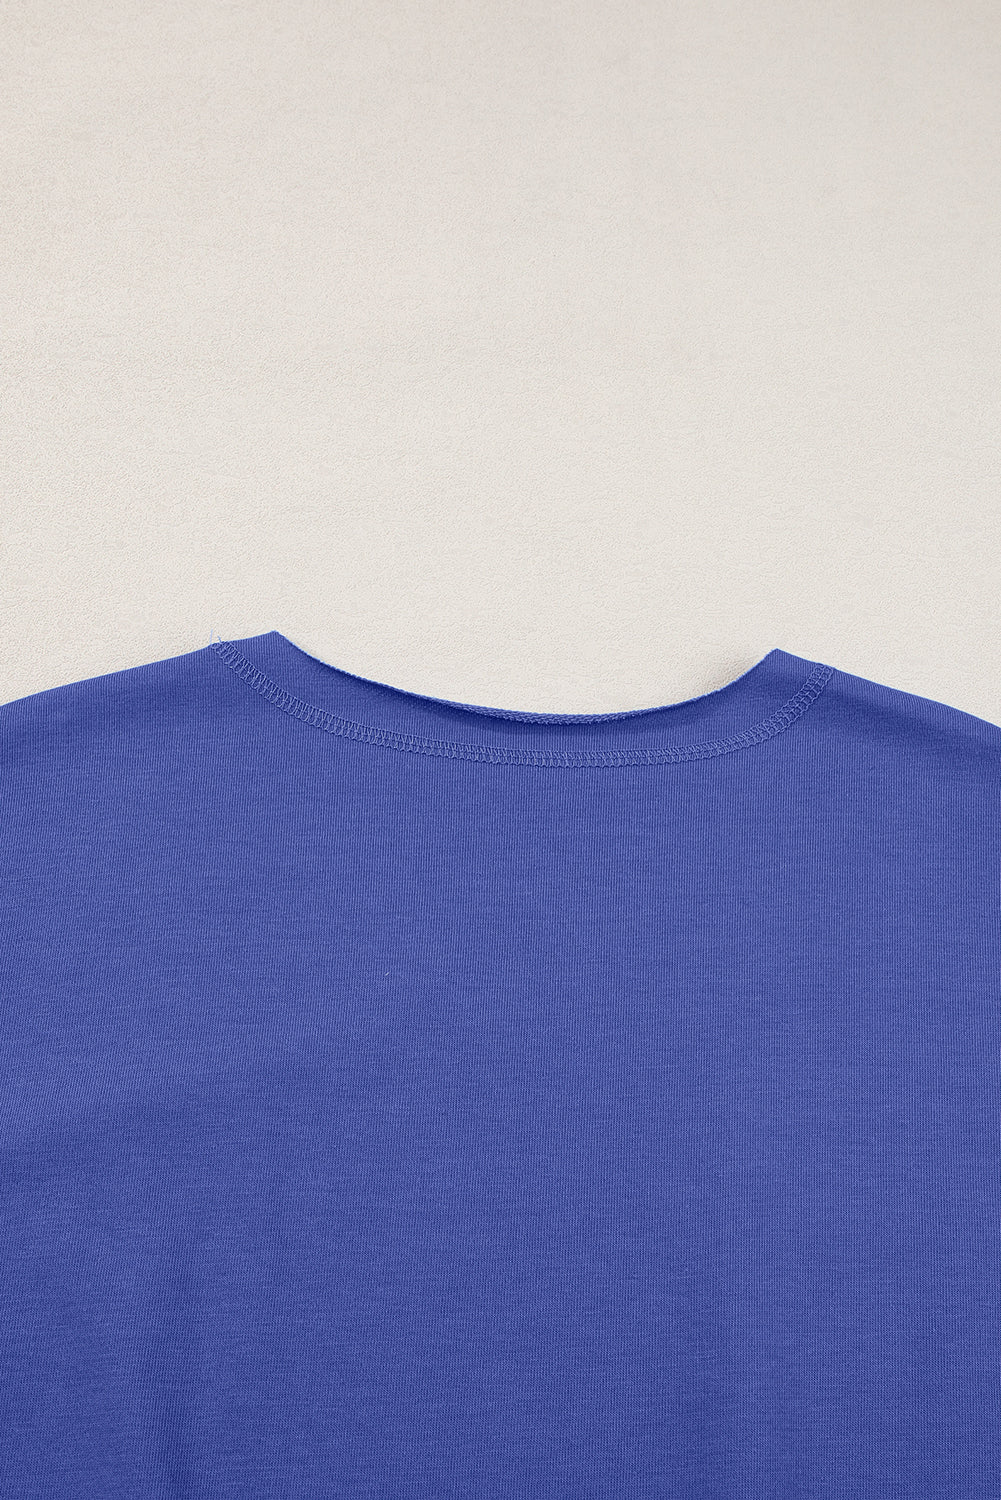 a close up of a blue shirt on a white background